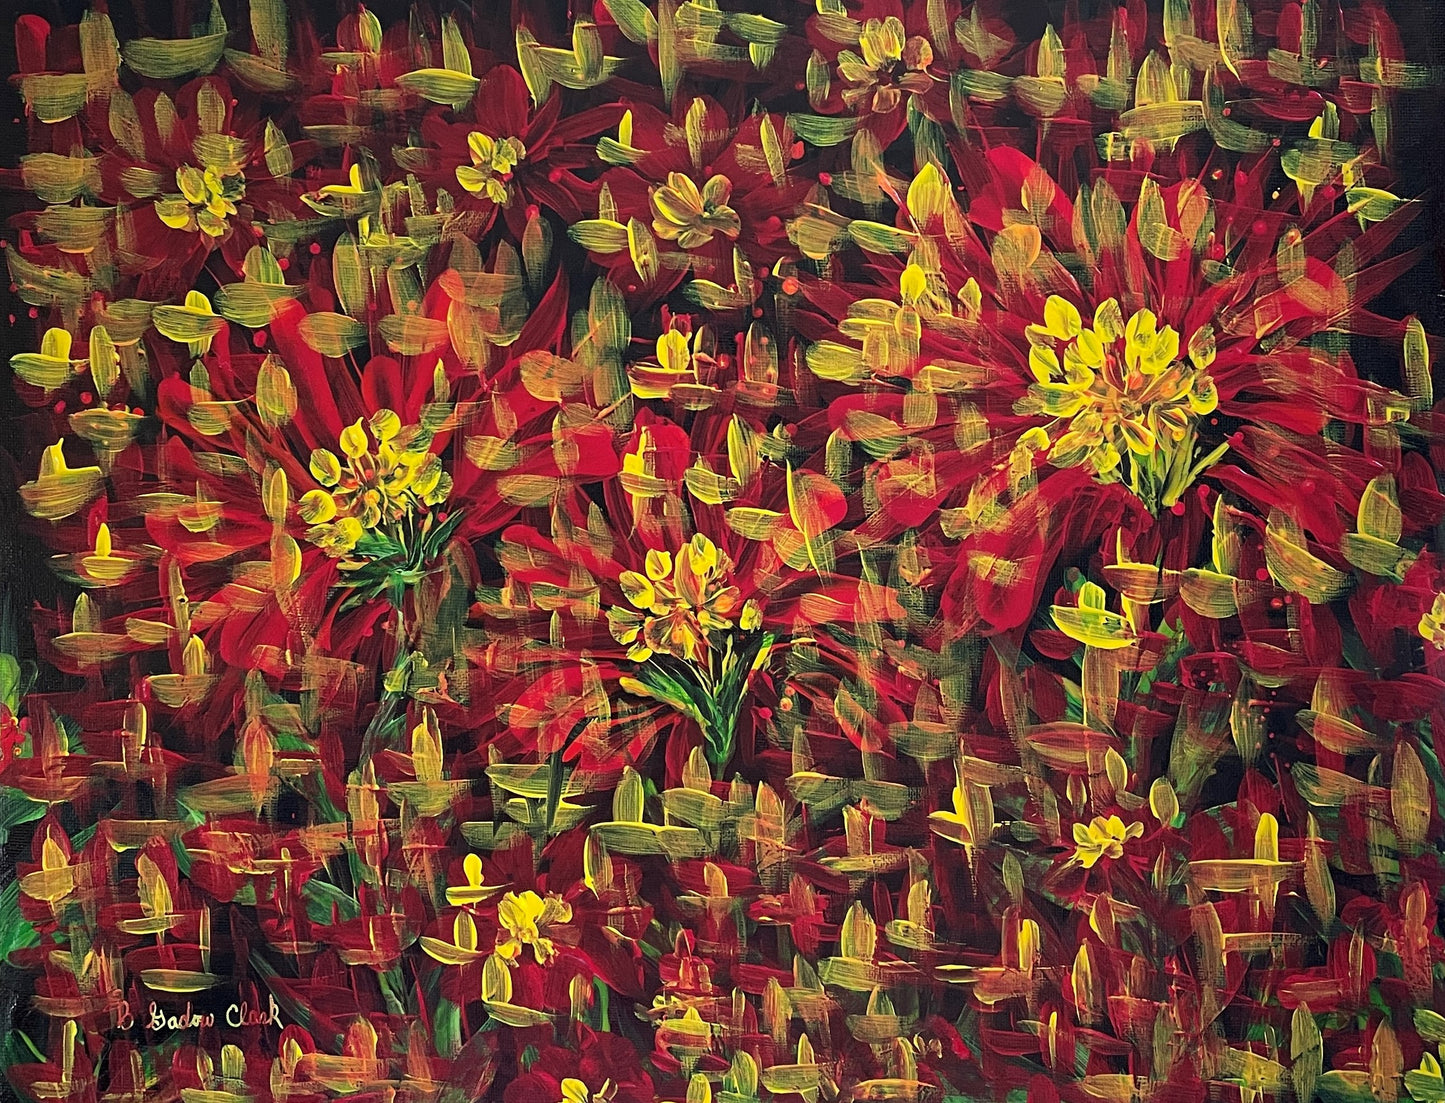 Abstract Painting of Multi-Color Flowers with Basketweave Effect Award Winning